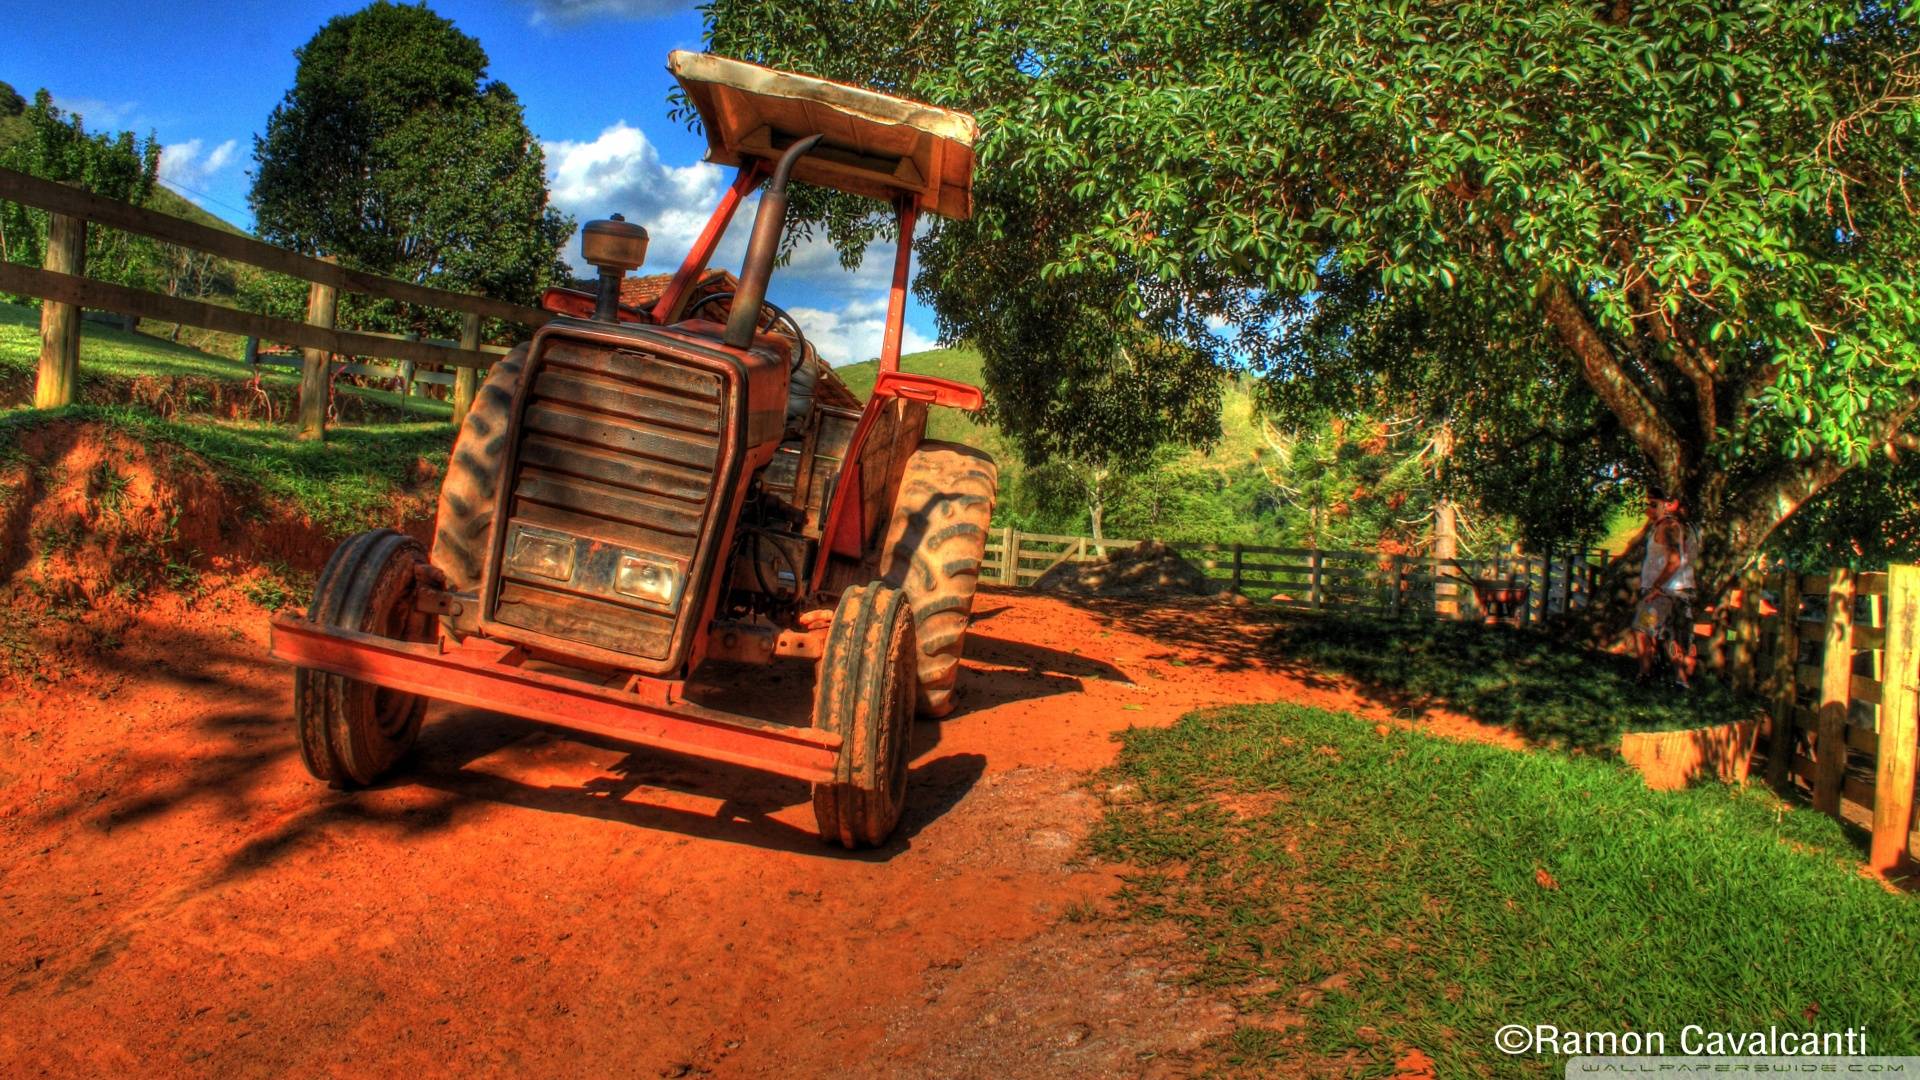 Tractor Image Wallpaper Adorable